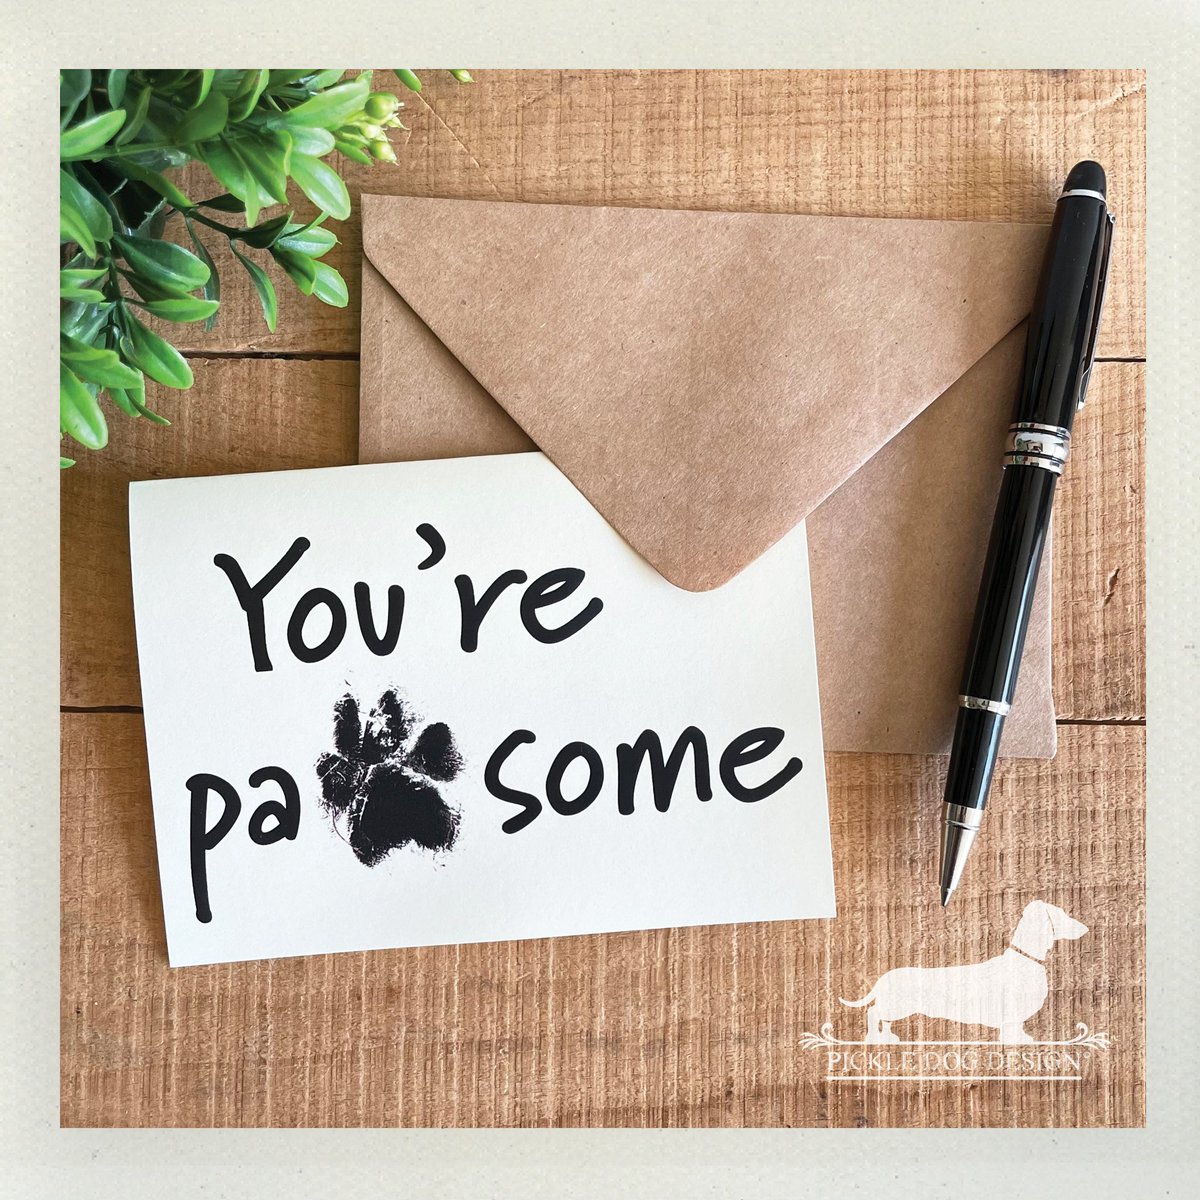 Who doesn’t need to hear that they’re pawsome... especially on a Monday. 🐾 NEW card in the shop: pickledogdesign.etsy.com/listing/155832…

#pawsome #yourepawsome #youarepawsome #dogpaw #dogpawcard #awesome #pawprint #youreawesome #youareawesome #mondaymood #card #cards #etsycard #etsycards